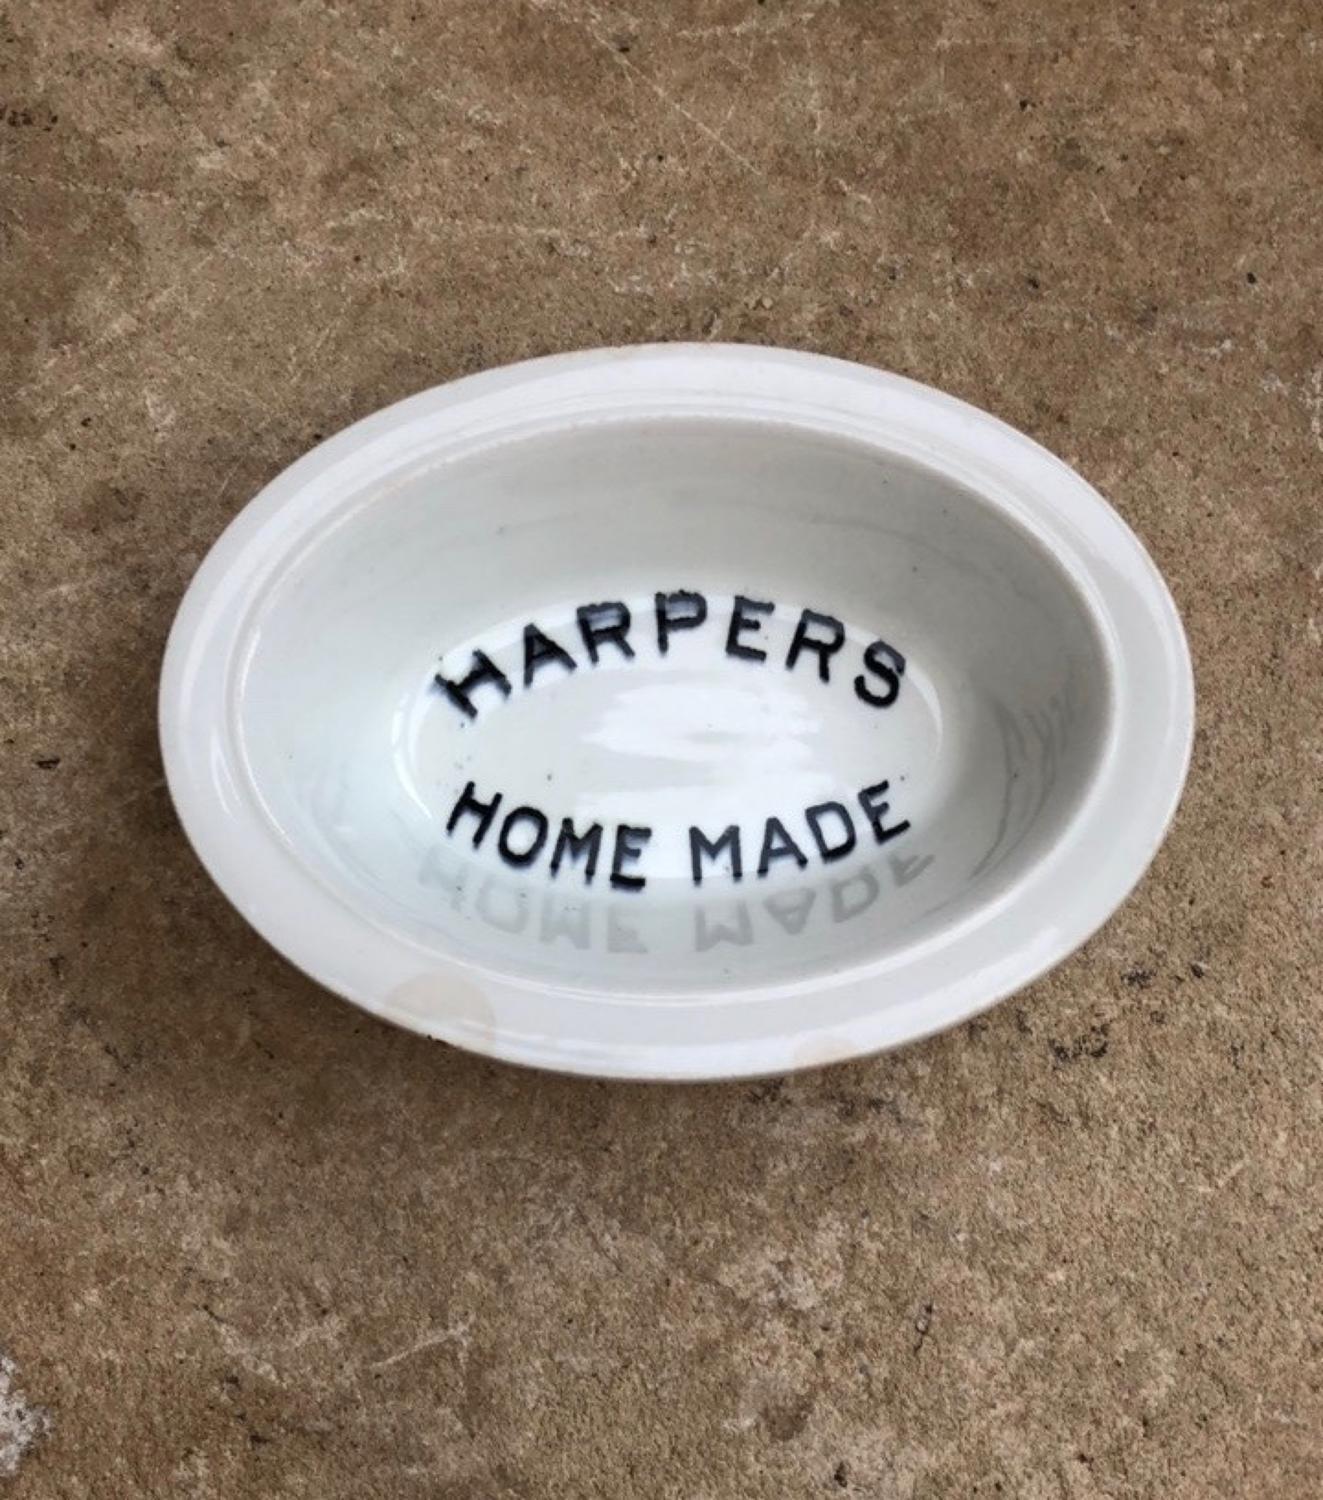 Edwardian White Ironstone Butchers Pie Dish - Harpers Home Made